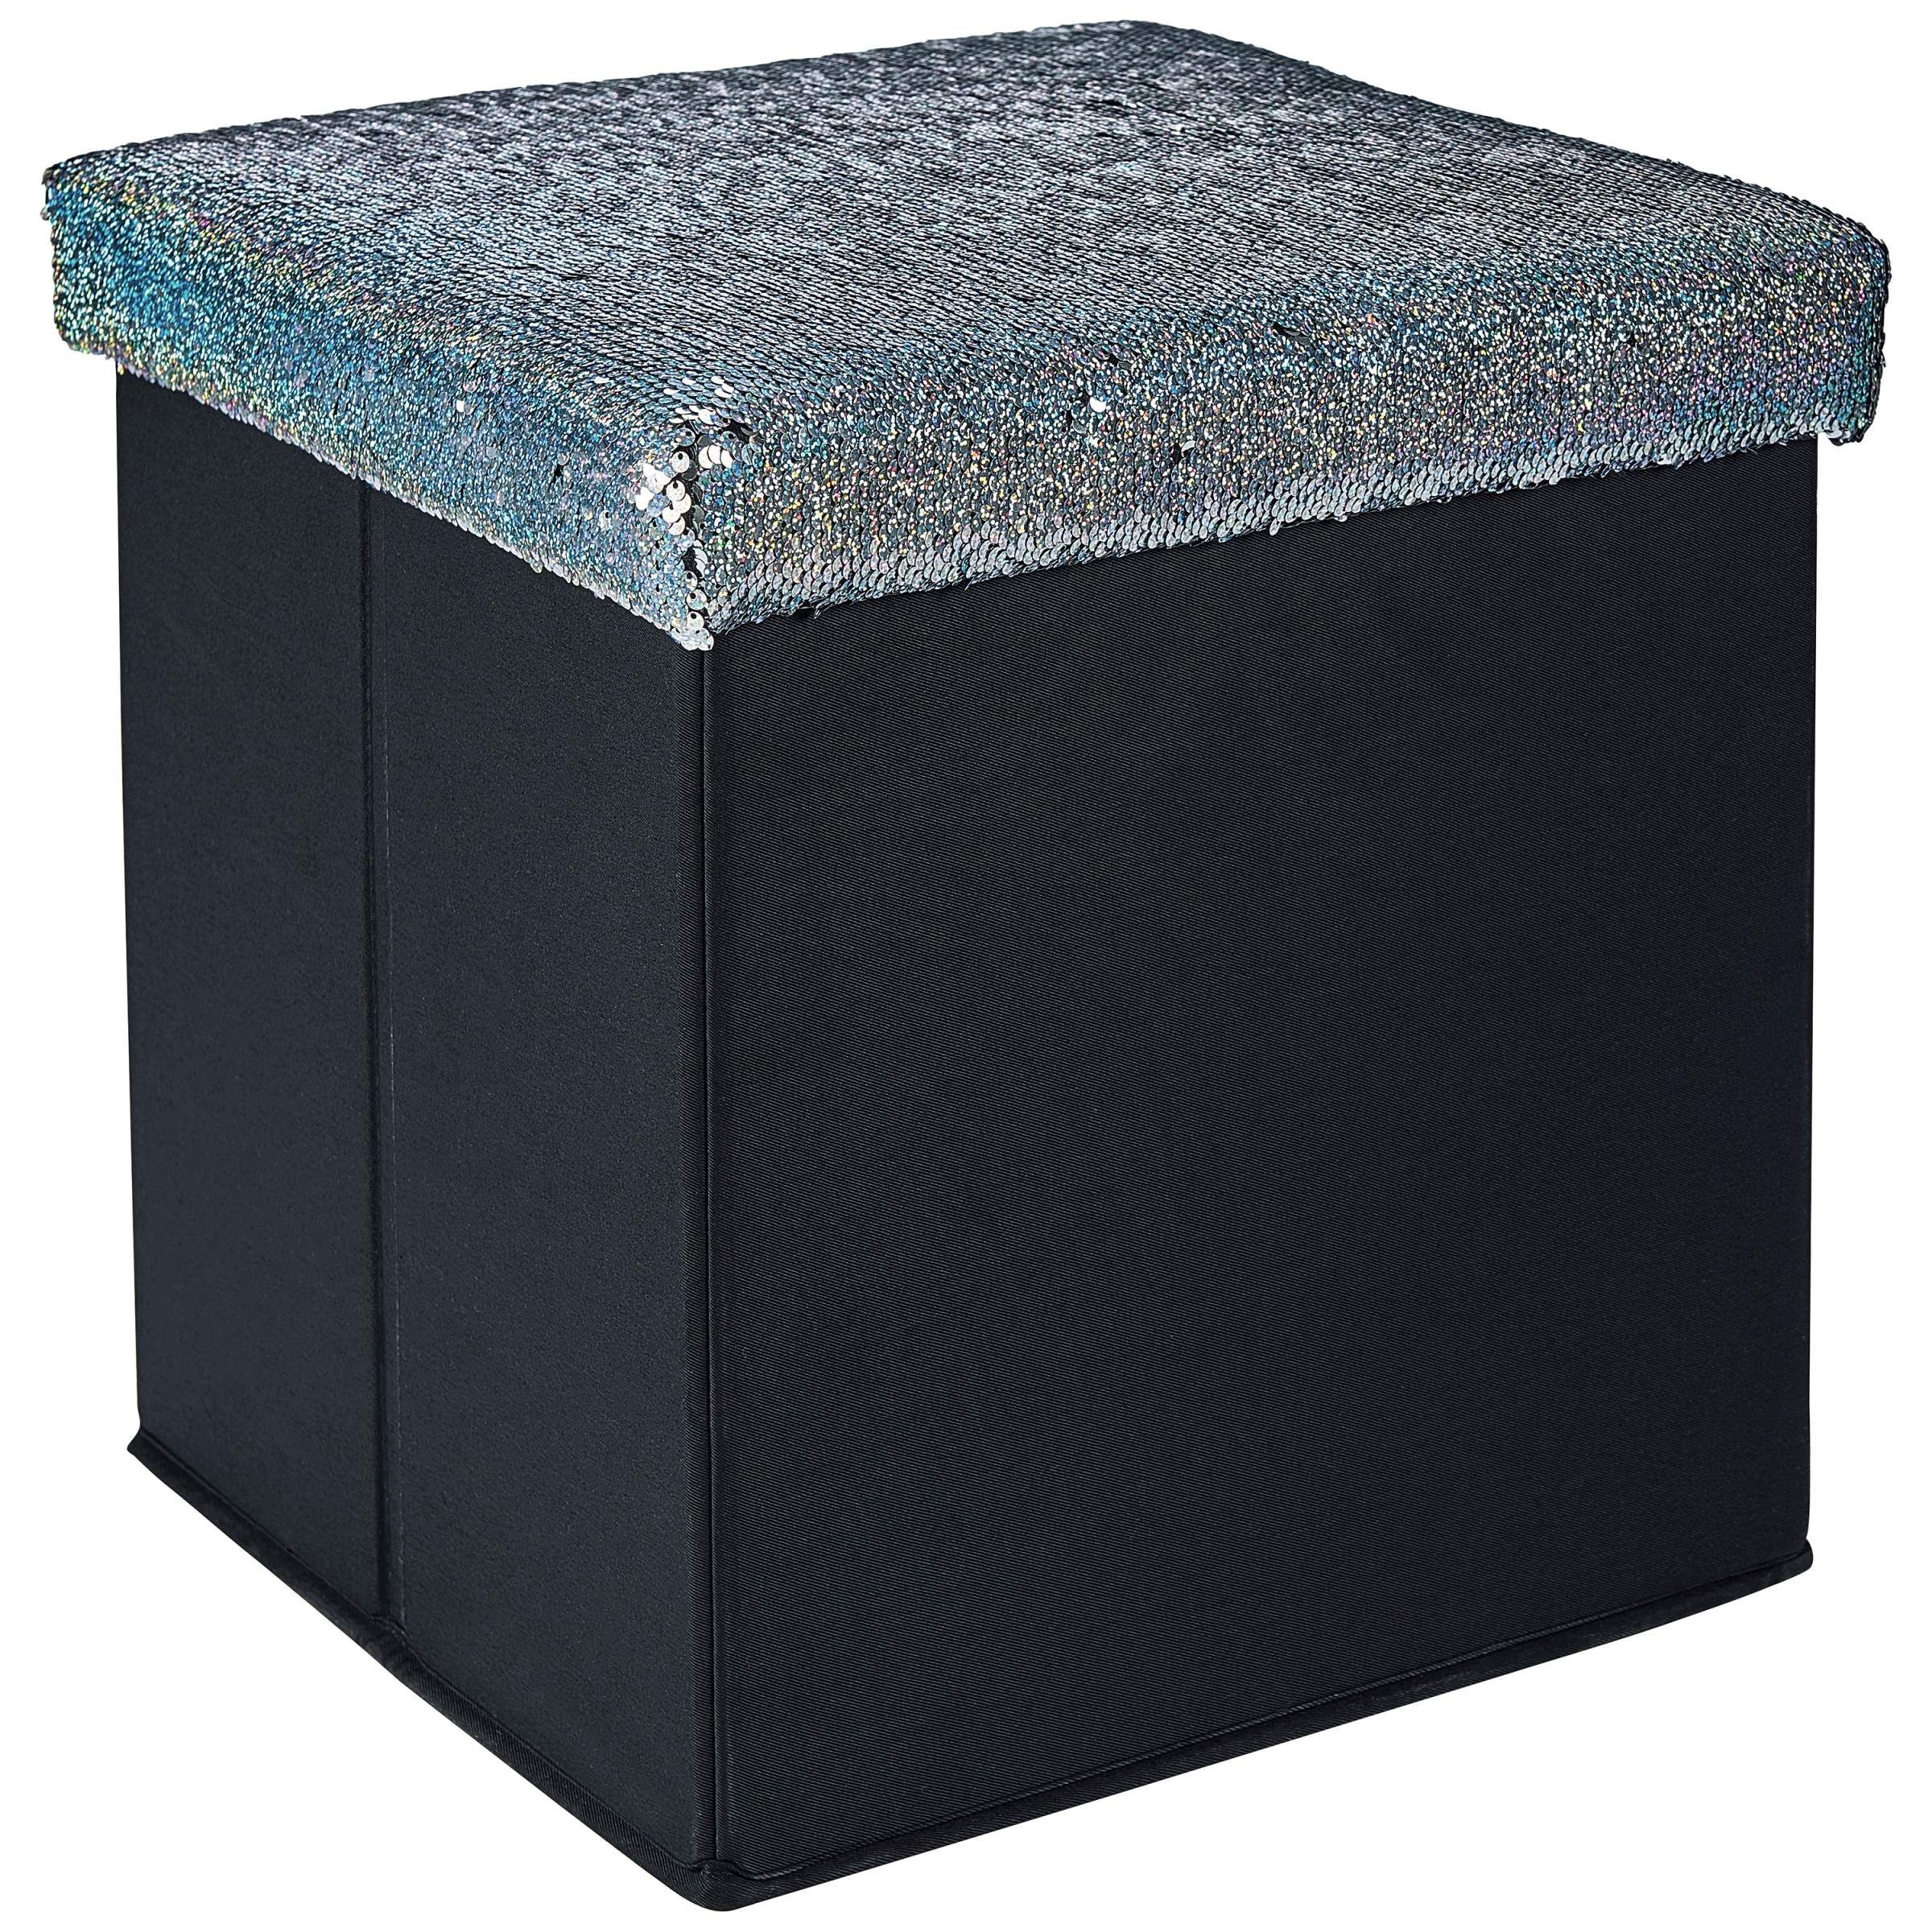 Ottomans With Sequins In Famous Mainstays Collapsible Storage Ottoman, Gold Glitter Sequins – Walmart (View 2 of 15)